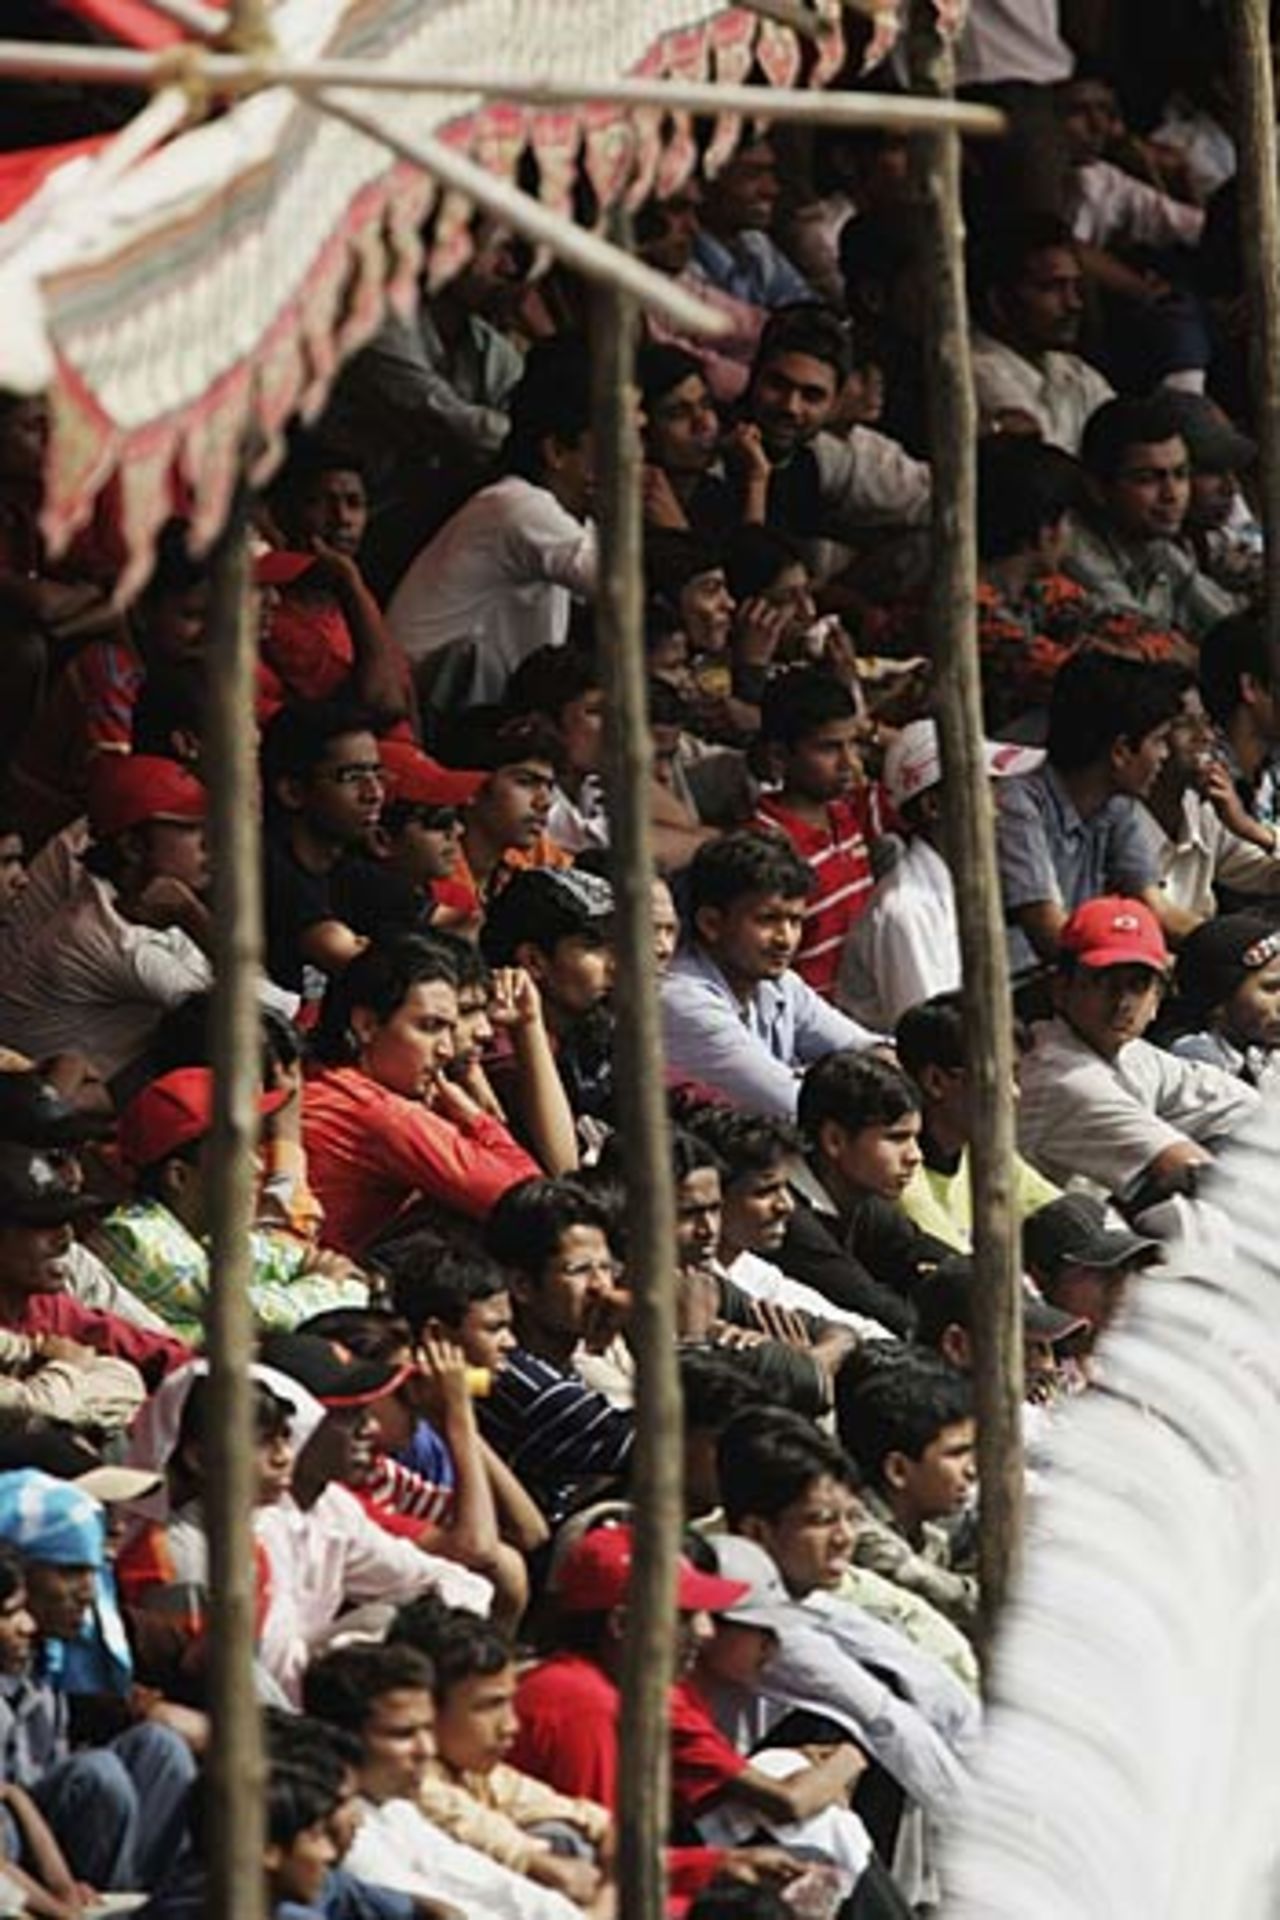 Spectators pack the stands to watch India's final practice session, Nagpur, February 28, 2006